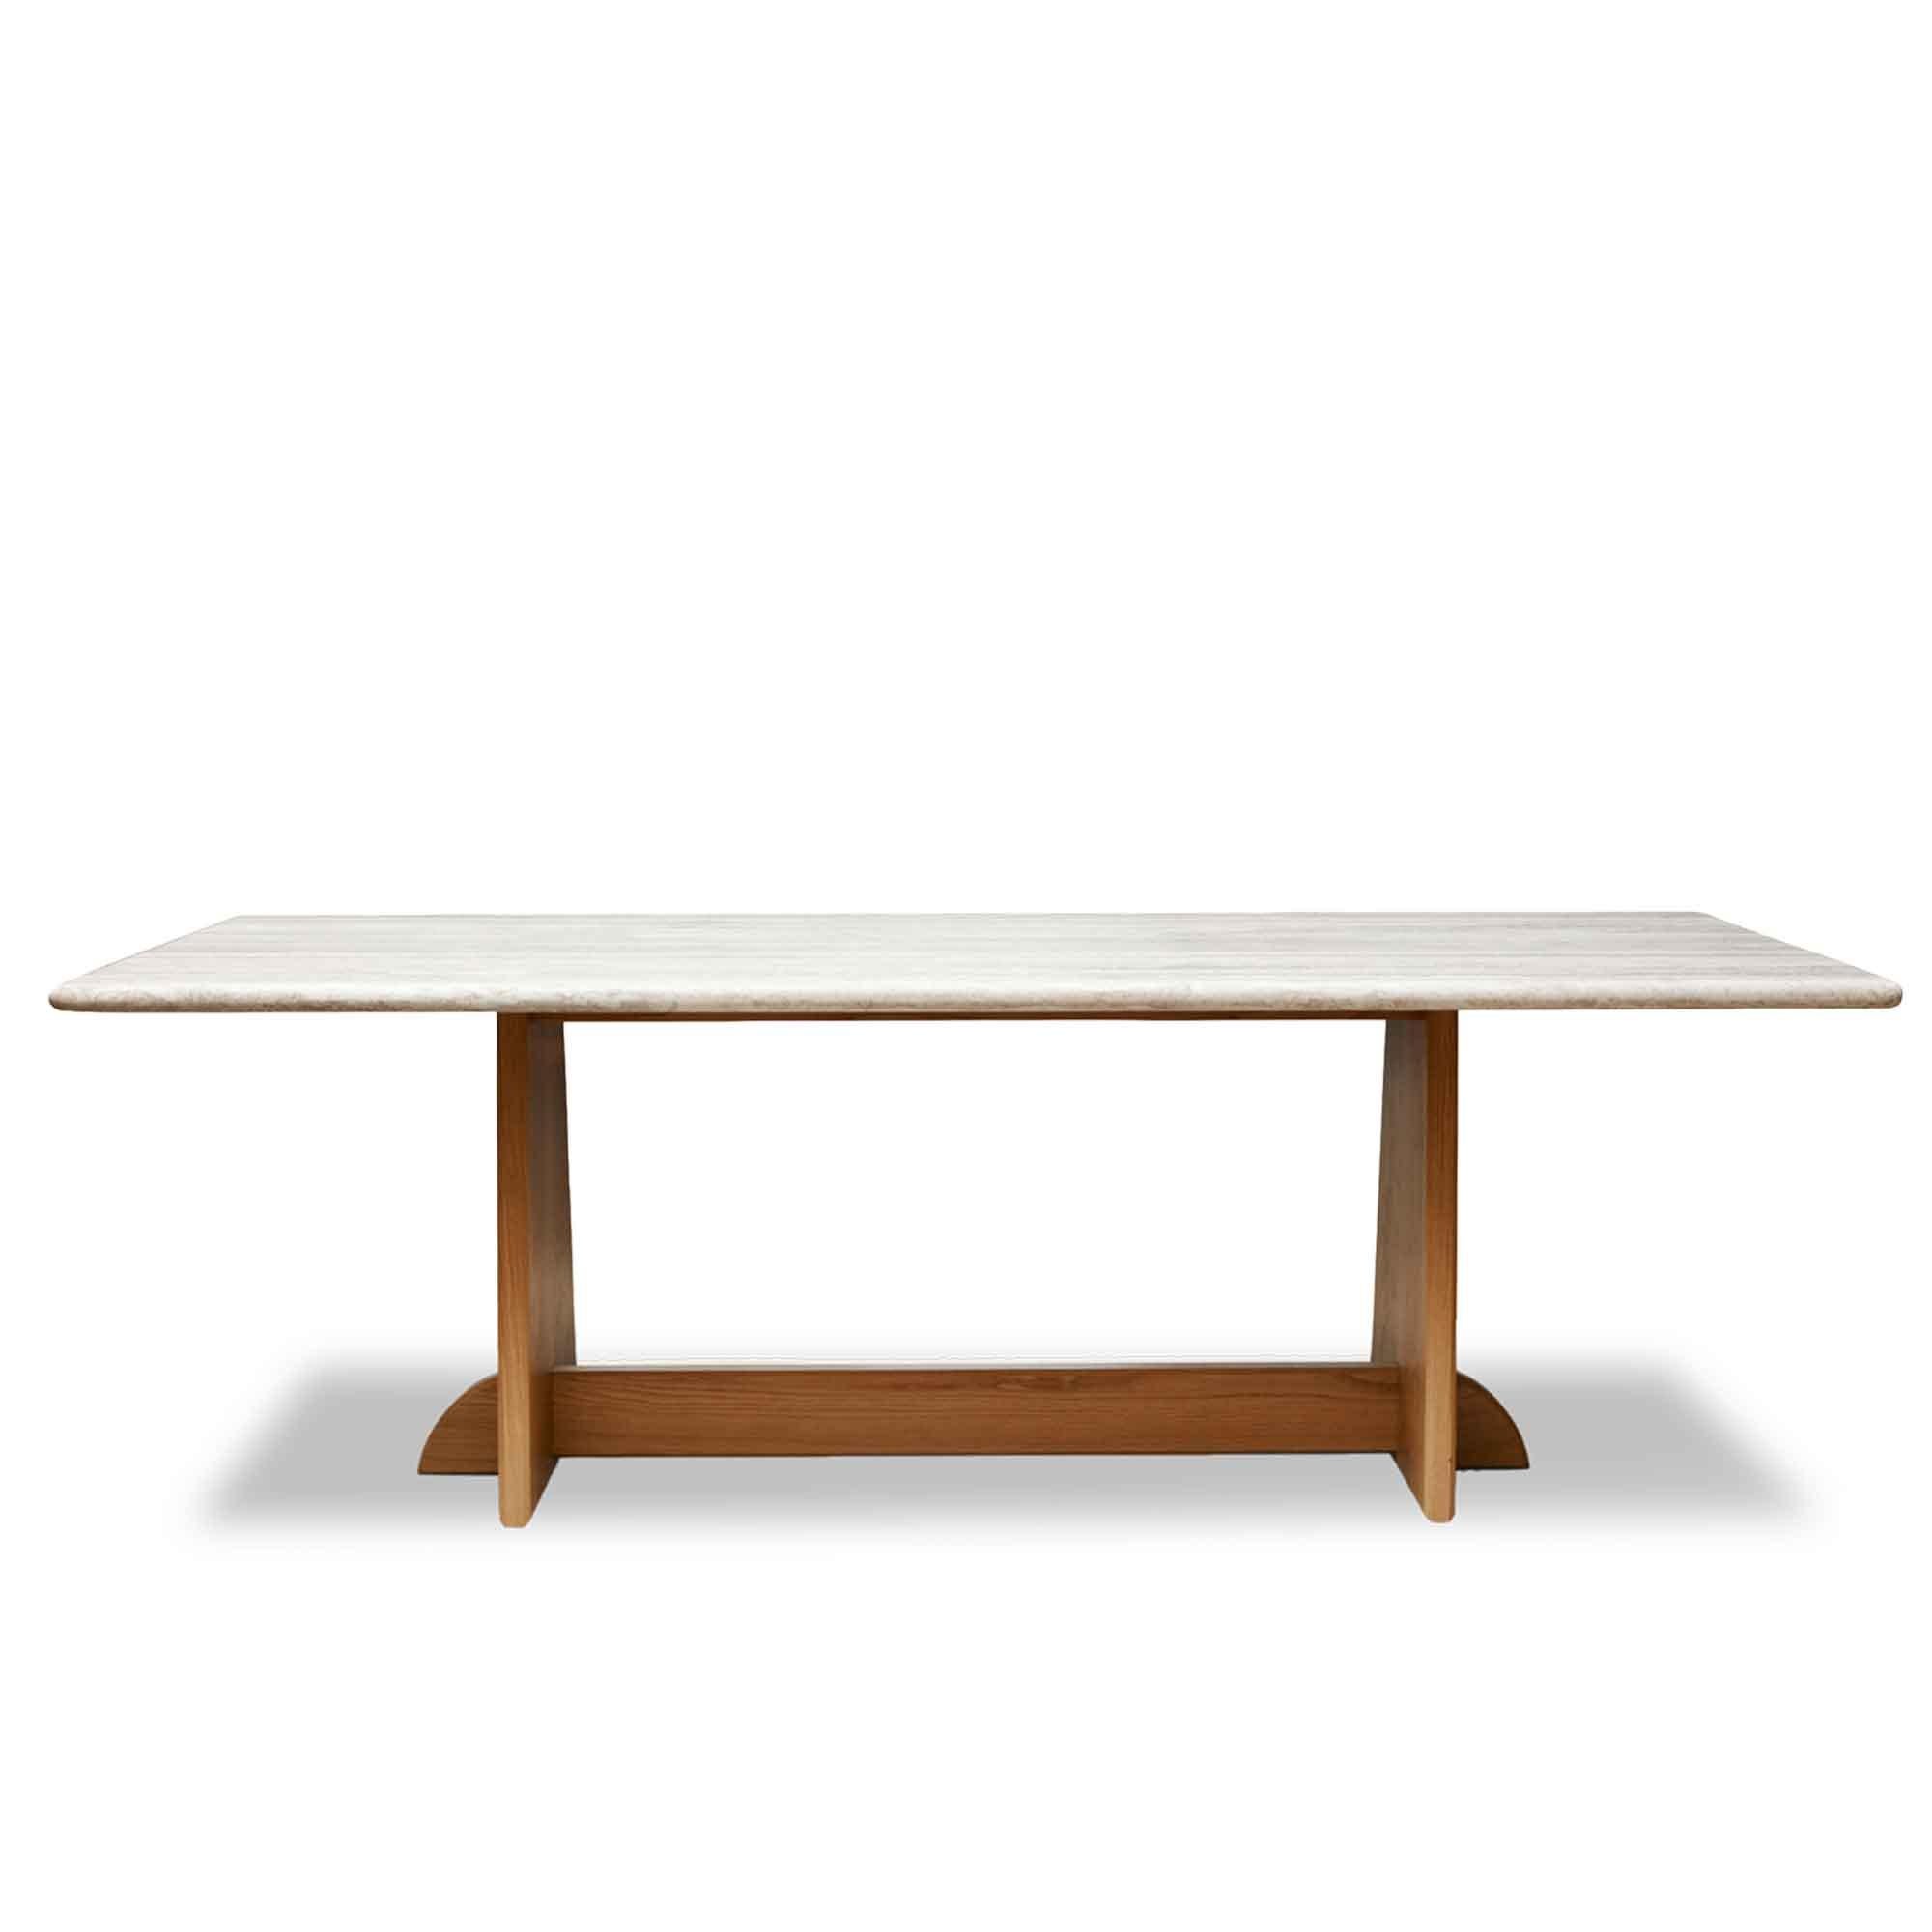 Mid-Century Modern Travertine and Oak Ojai Dining Table by Lawson-Fenning For Sale